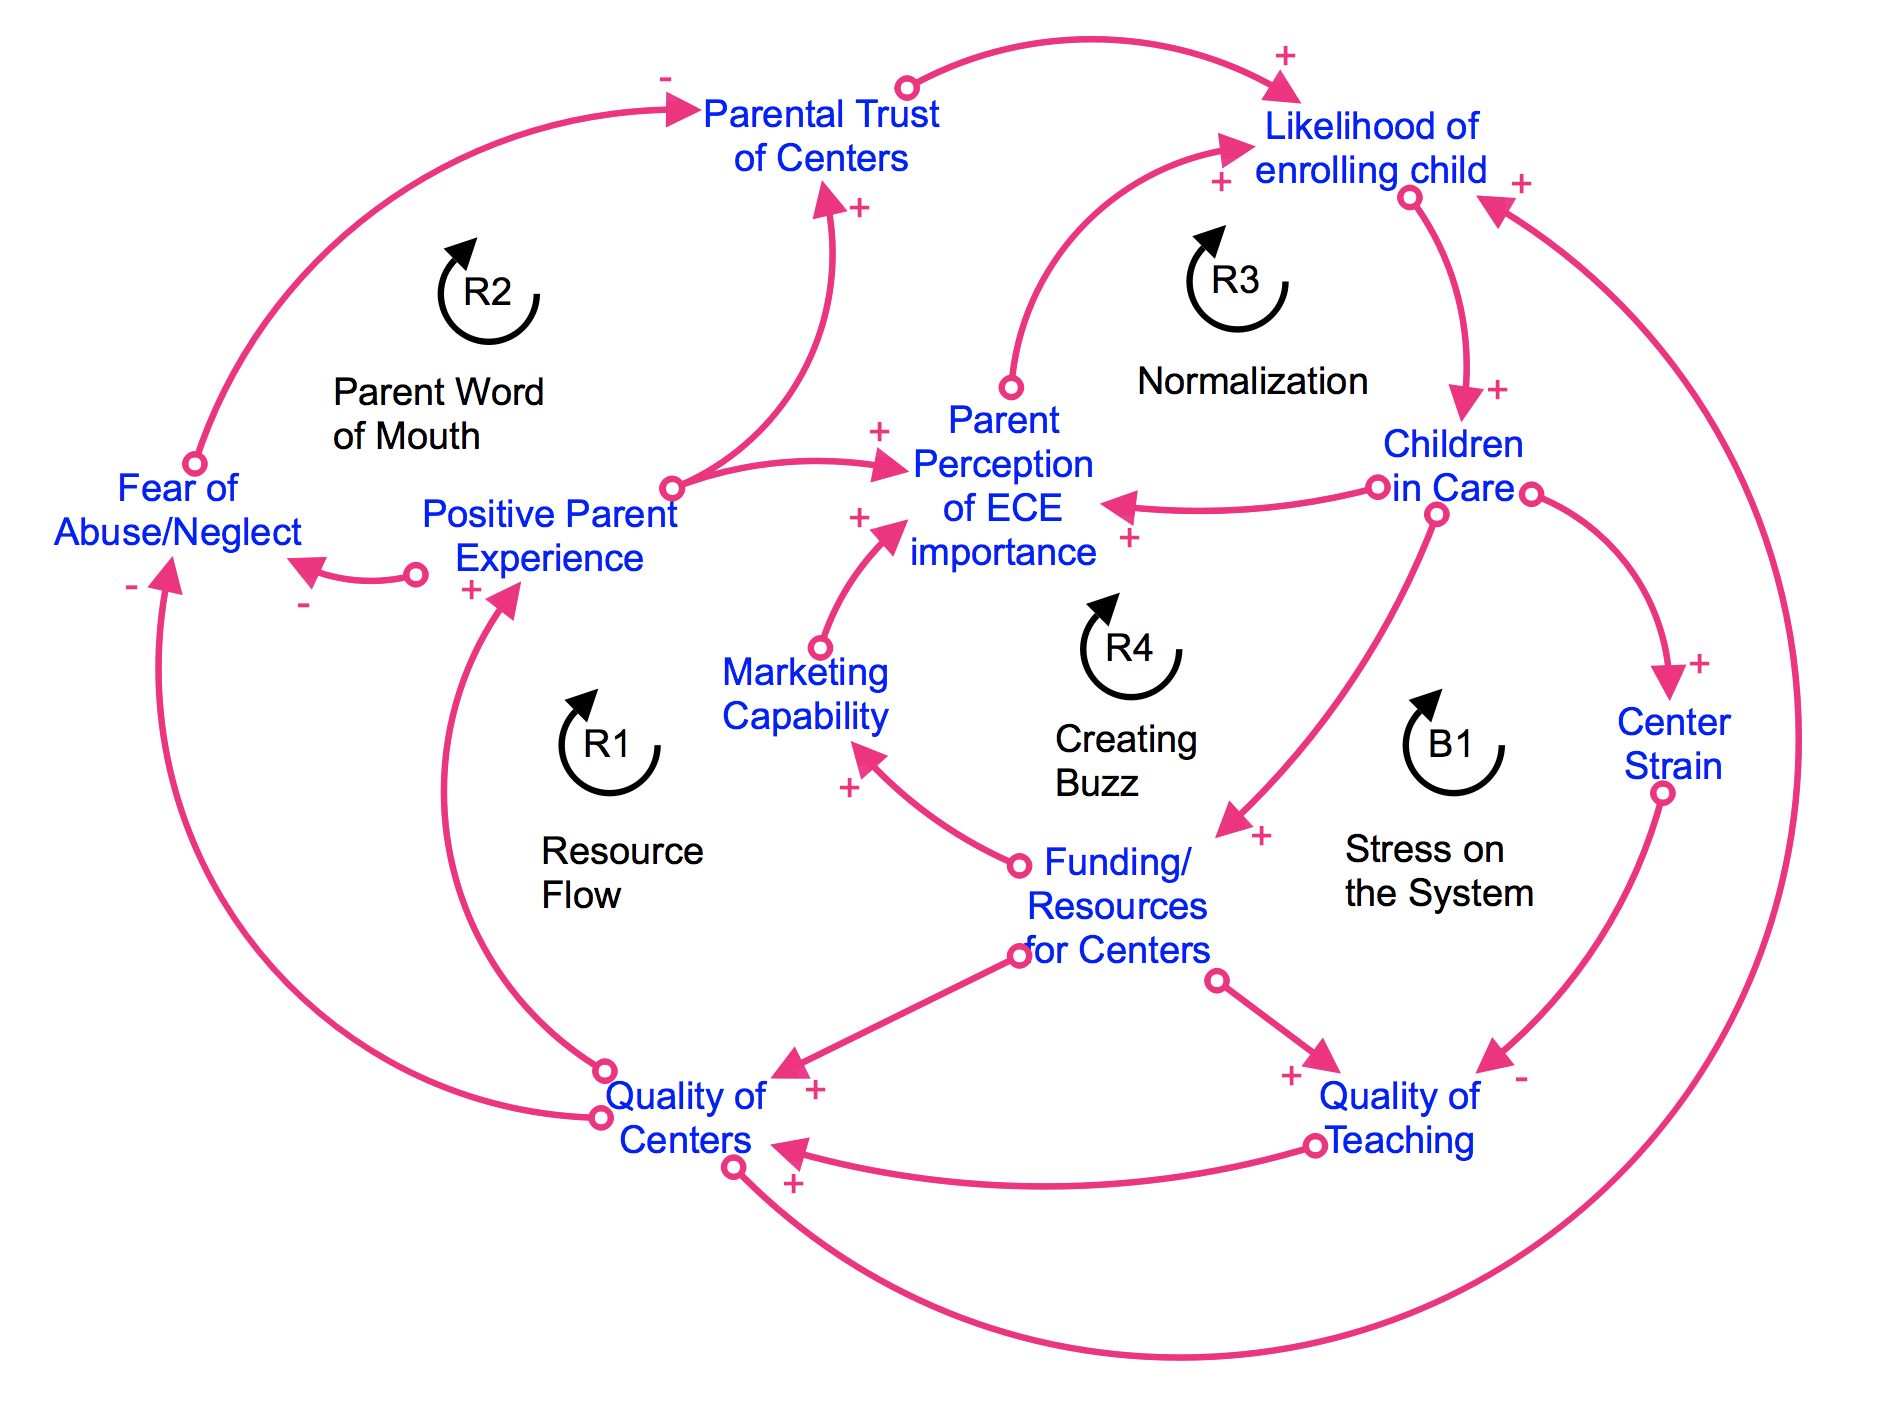 A causal loop diagram of the feedback loops at play in parents’ and guardians’ decisions to enroll in early childhood education.